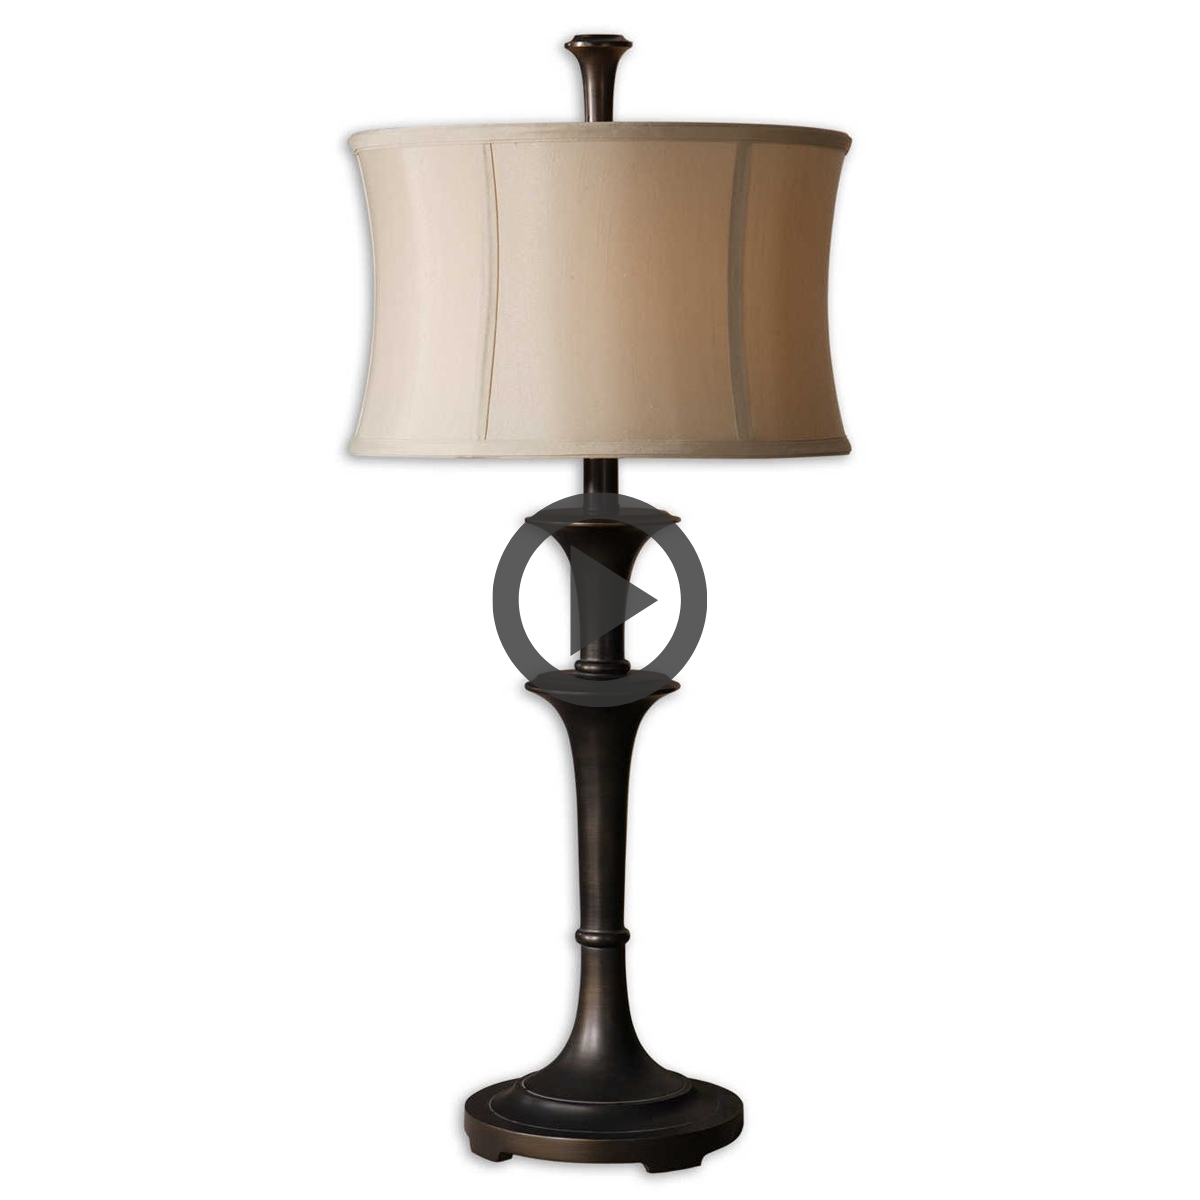 Brazoria Table Lamp Uttermost, Uttermost Xander Distressed Bronze Table Lamp